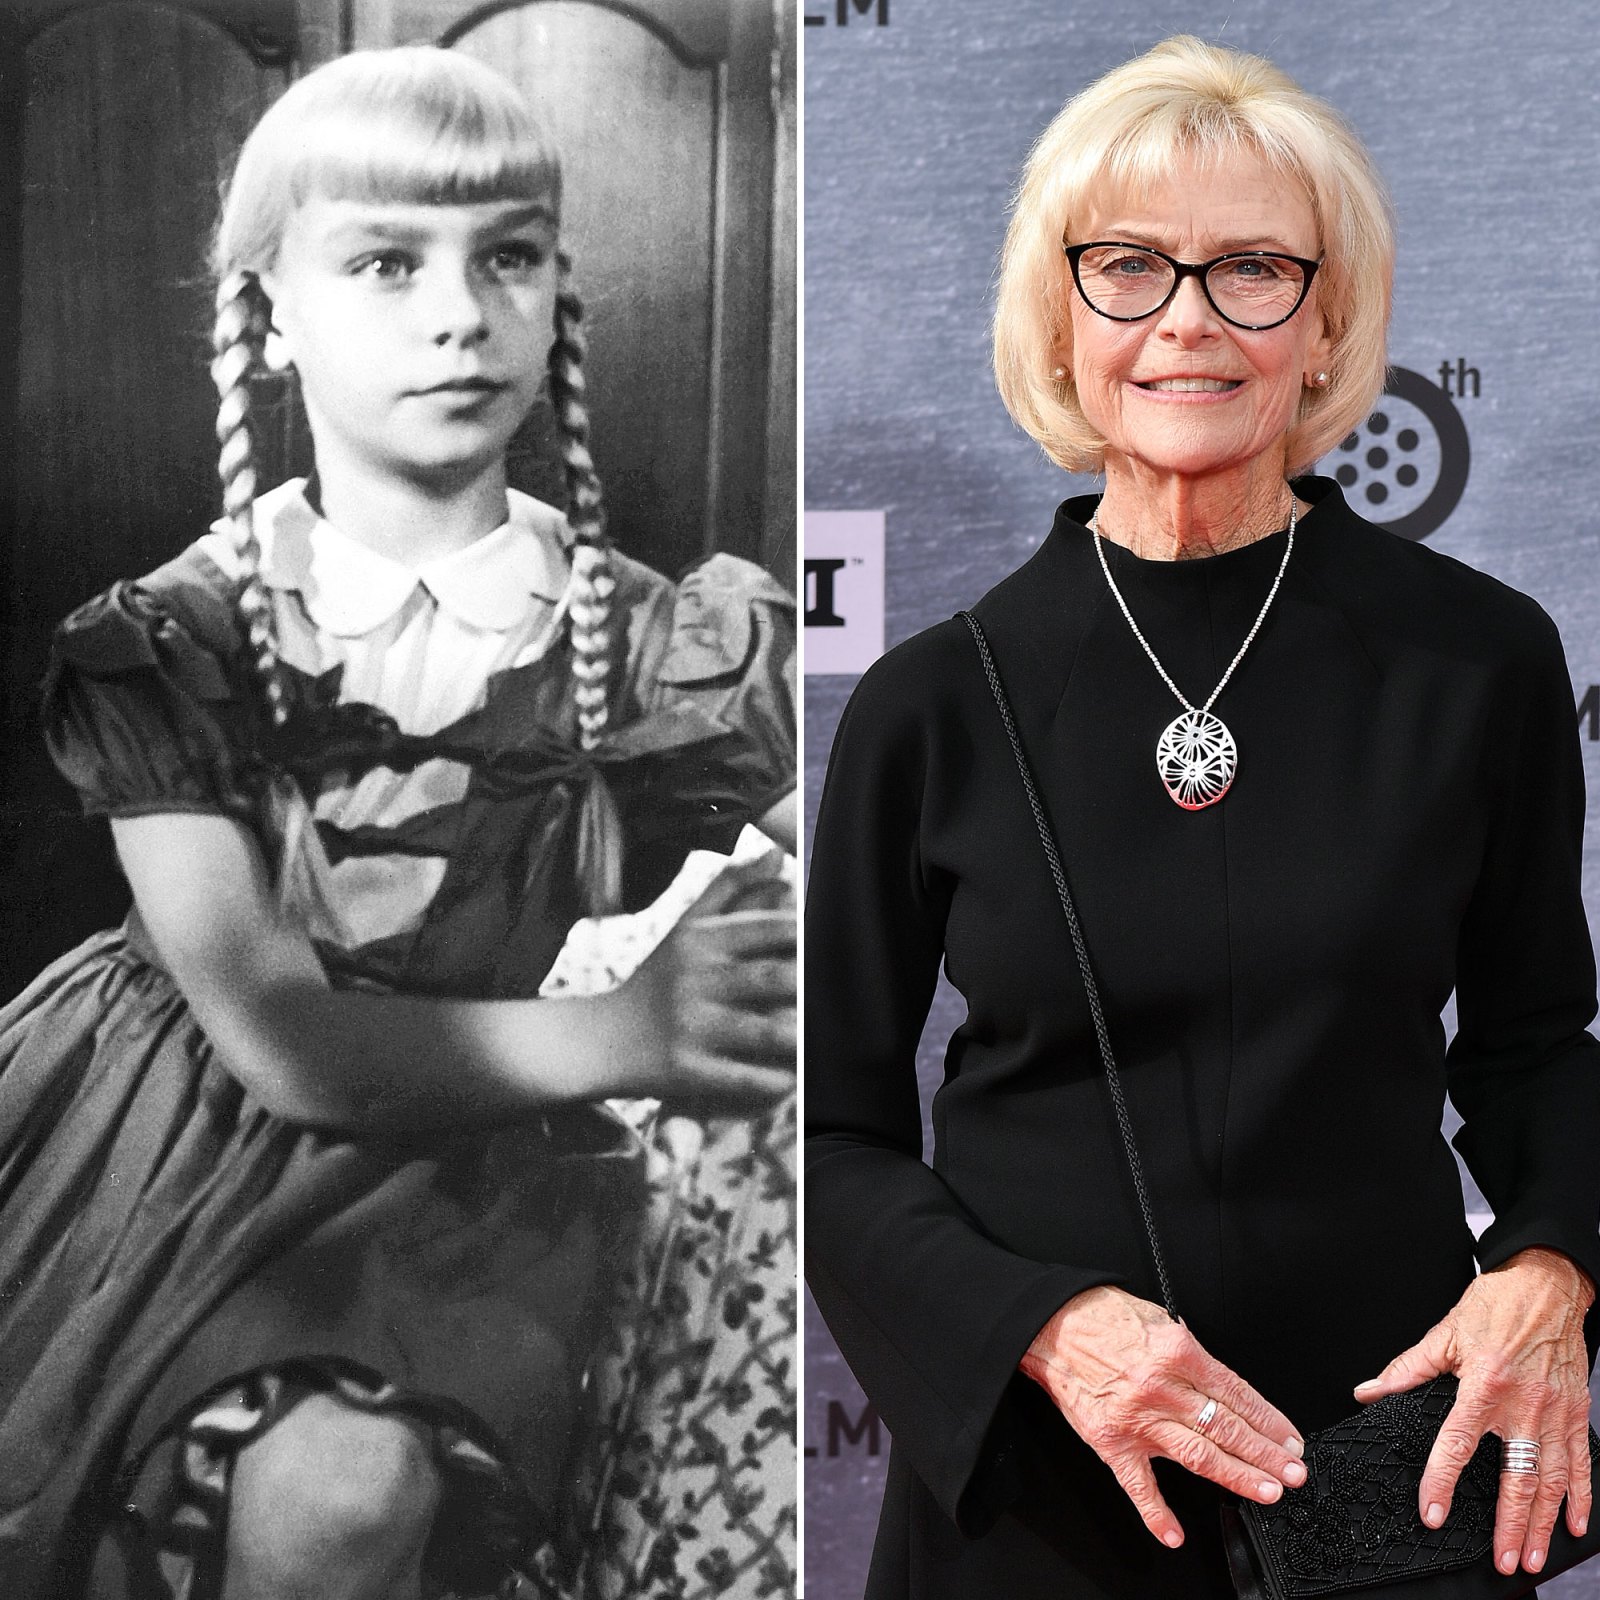 Patty McCormack Creepy Horror Movie Kids Where Are They Now? Drew Barrymore Haley Joel Osment and More